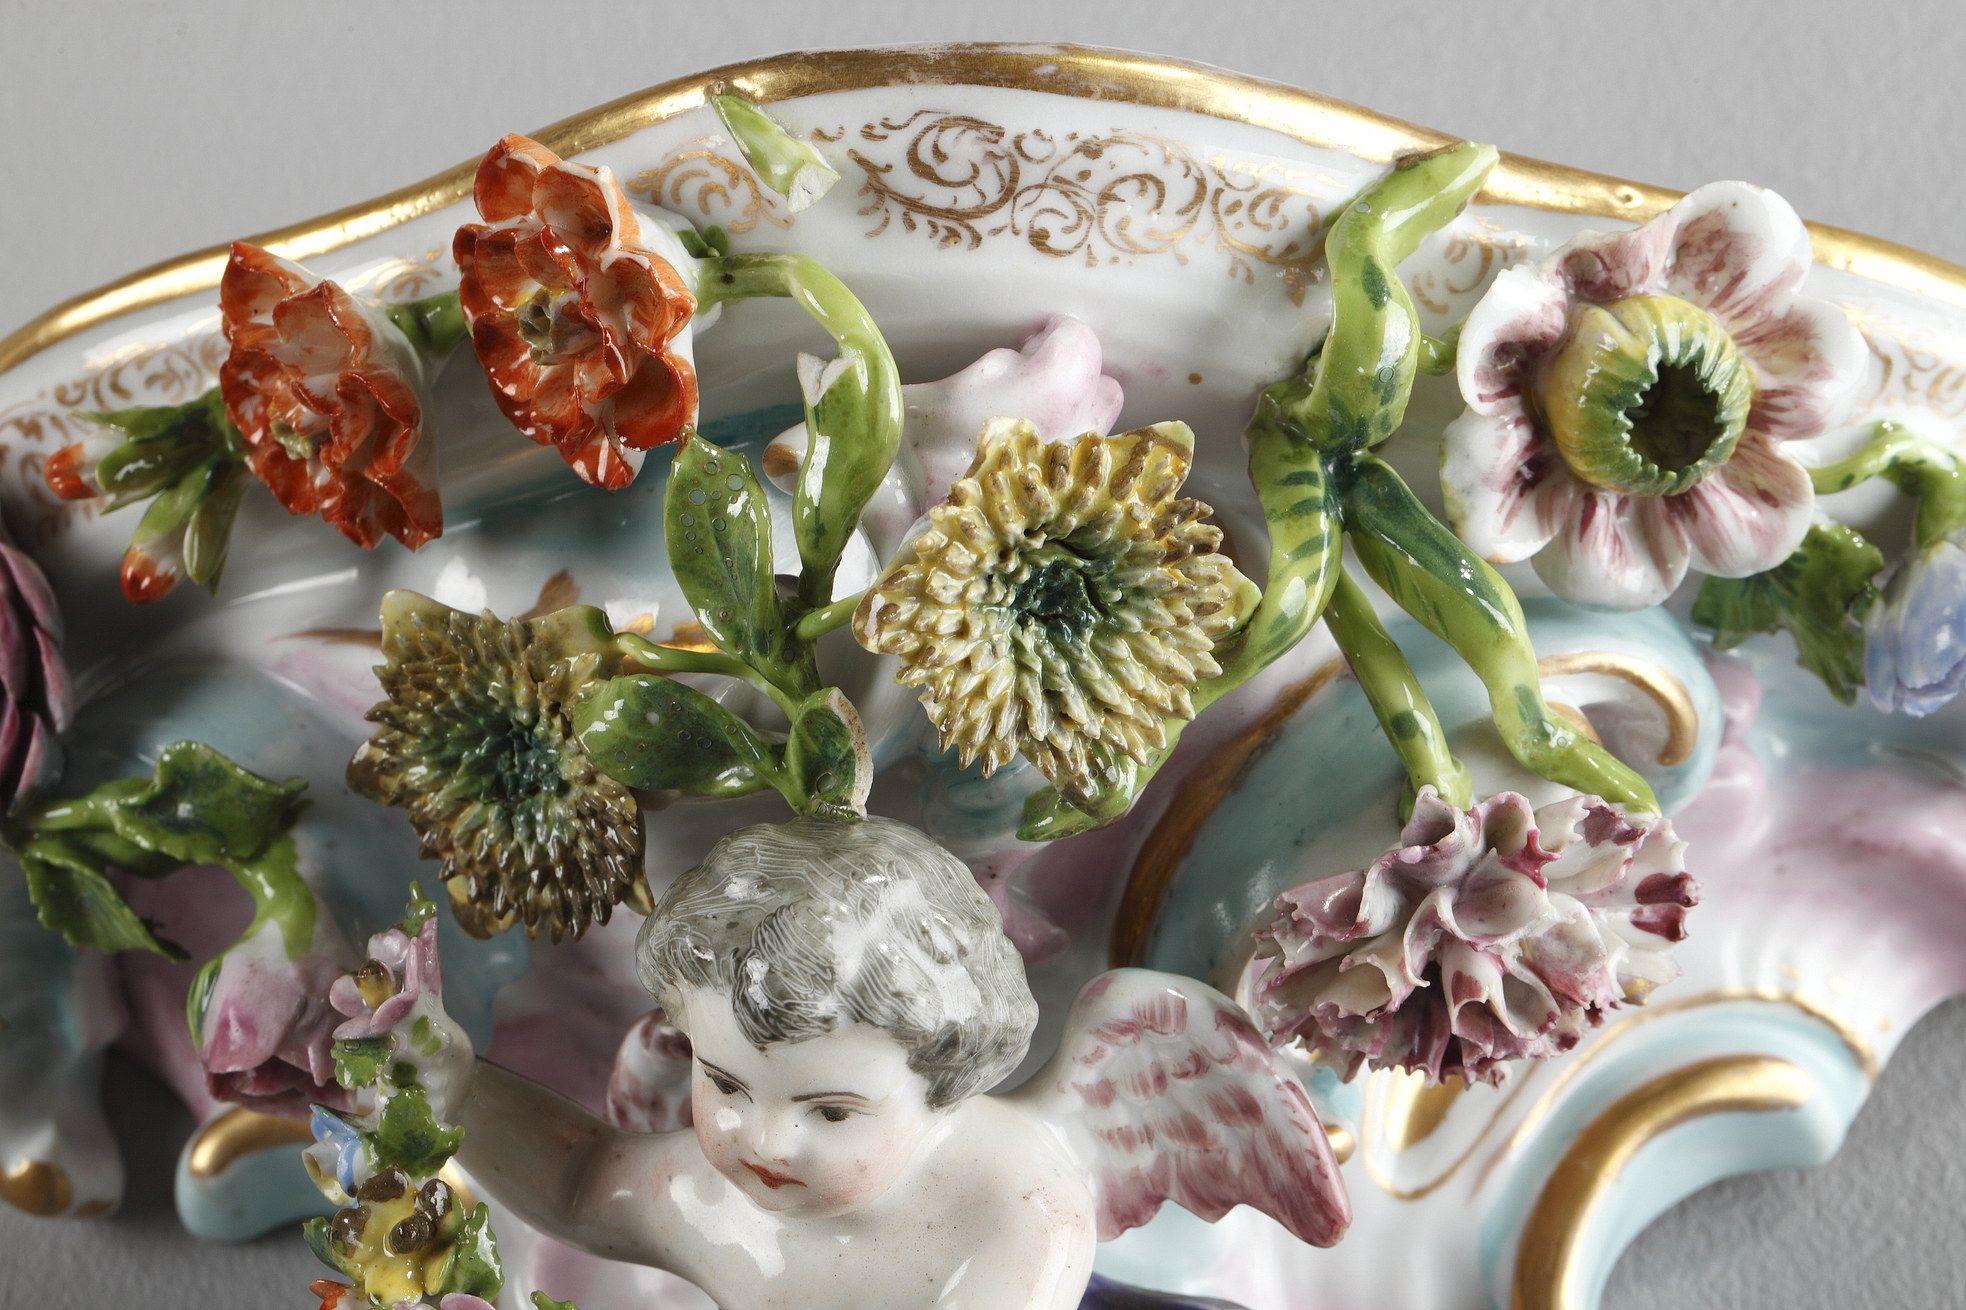 PAIR OF SMALL ROCAILLE CONSOLES IN THE STYLE OF THE MEISSEN MANUFACTORY